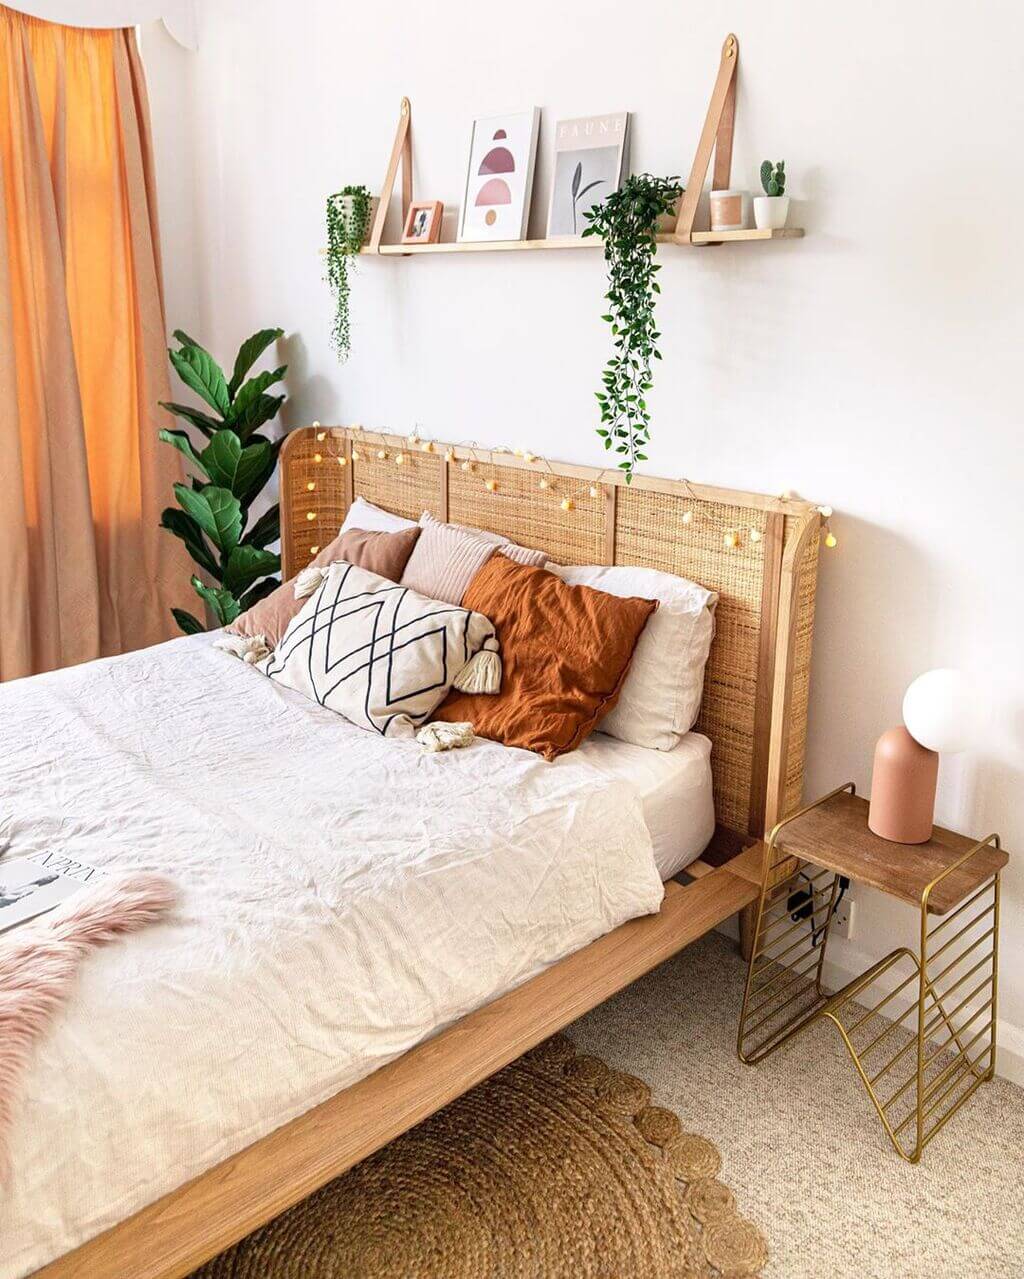 A bed with a wooden headboard and pillows
